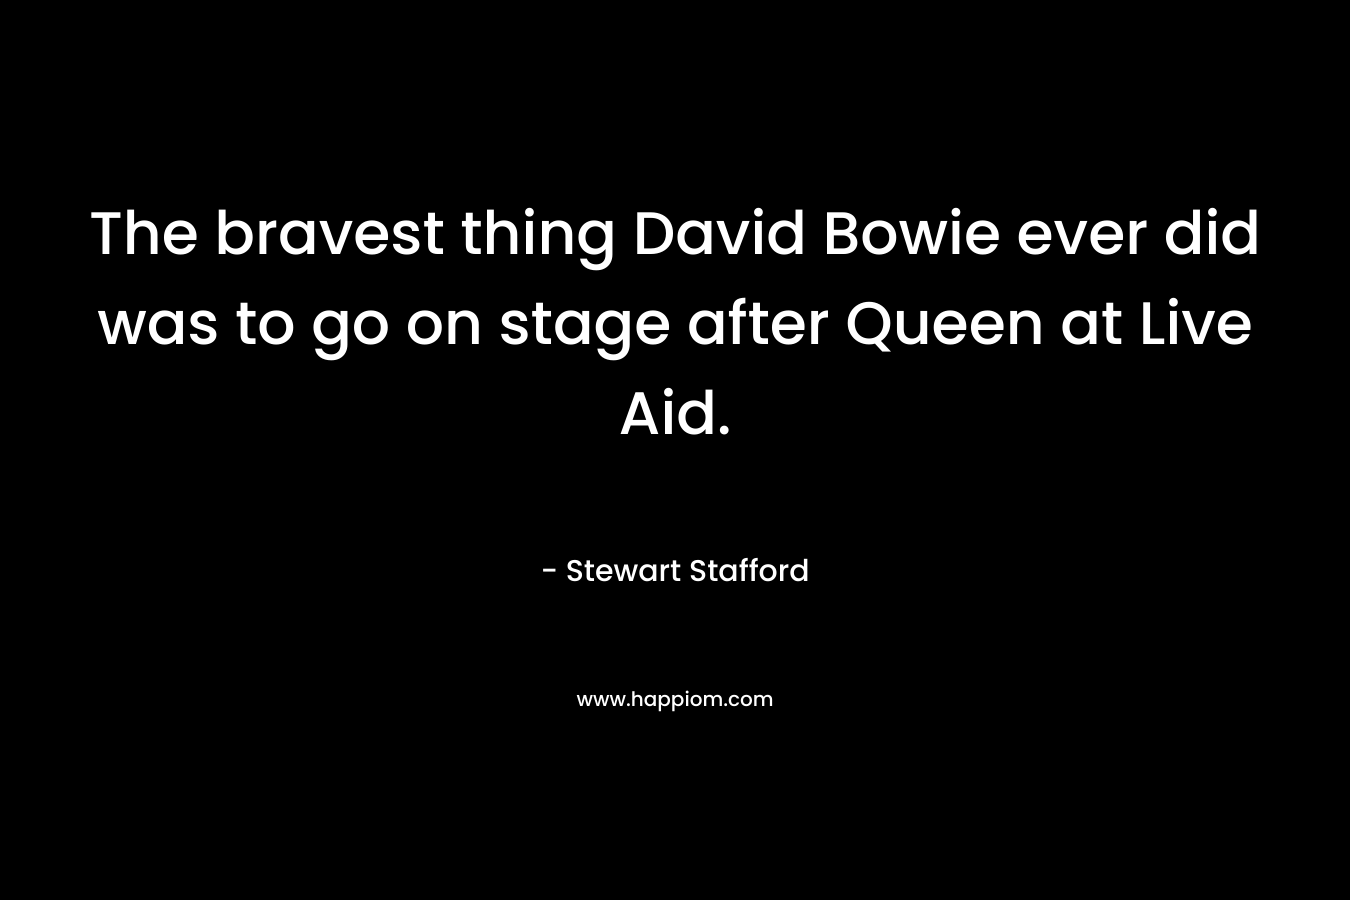 The bravest thing David Bowie ever did was to go on stage after Queen at Live Aid.